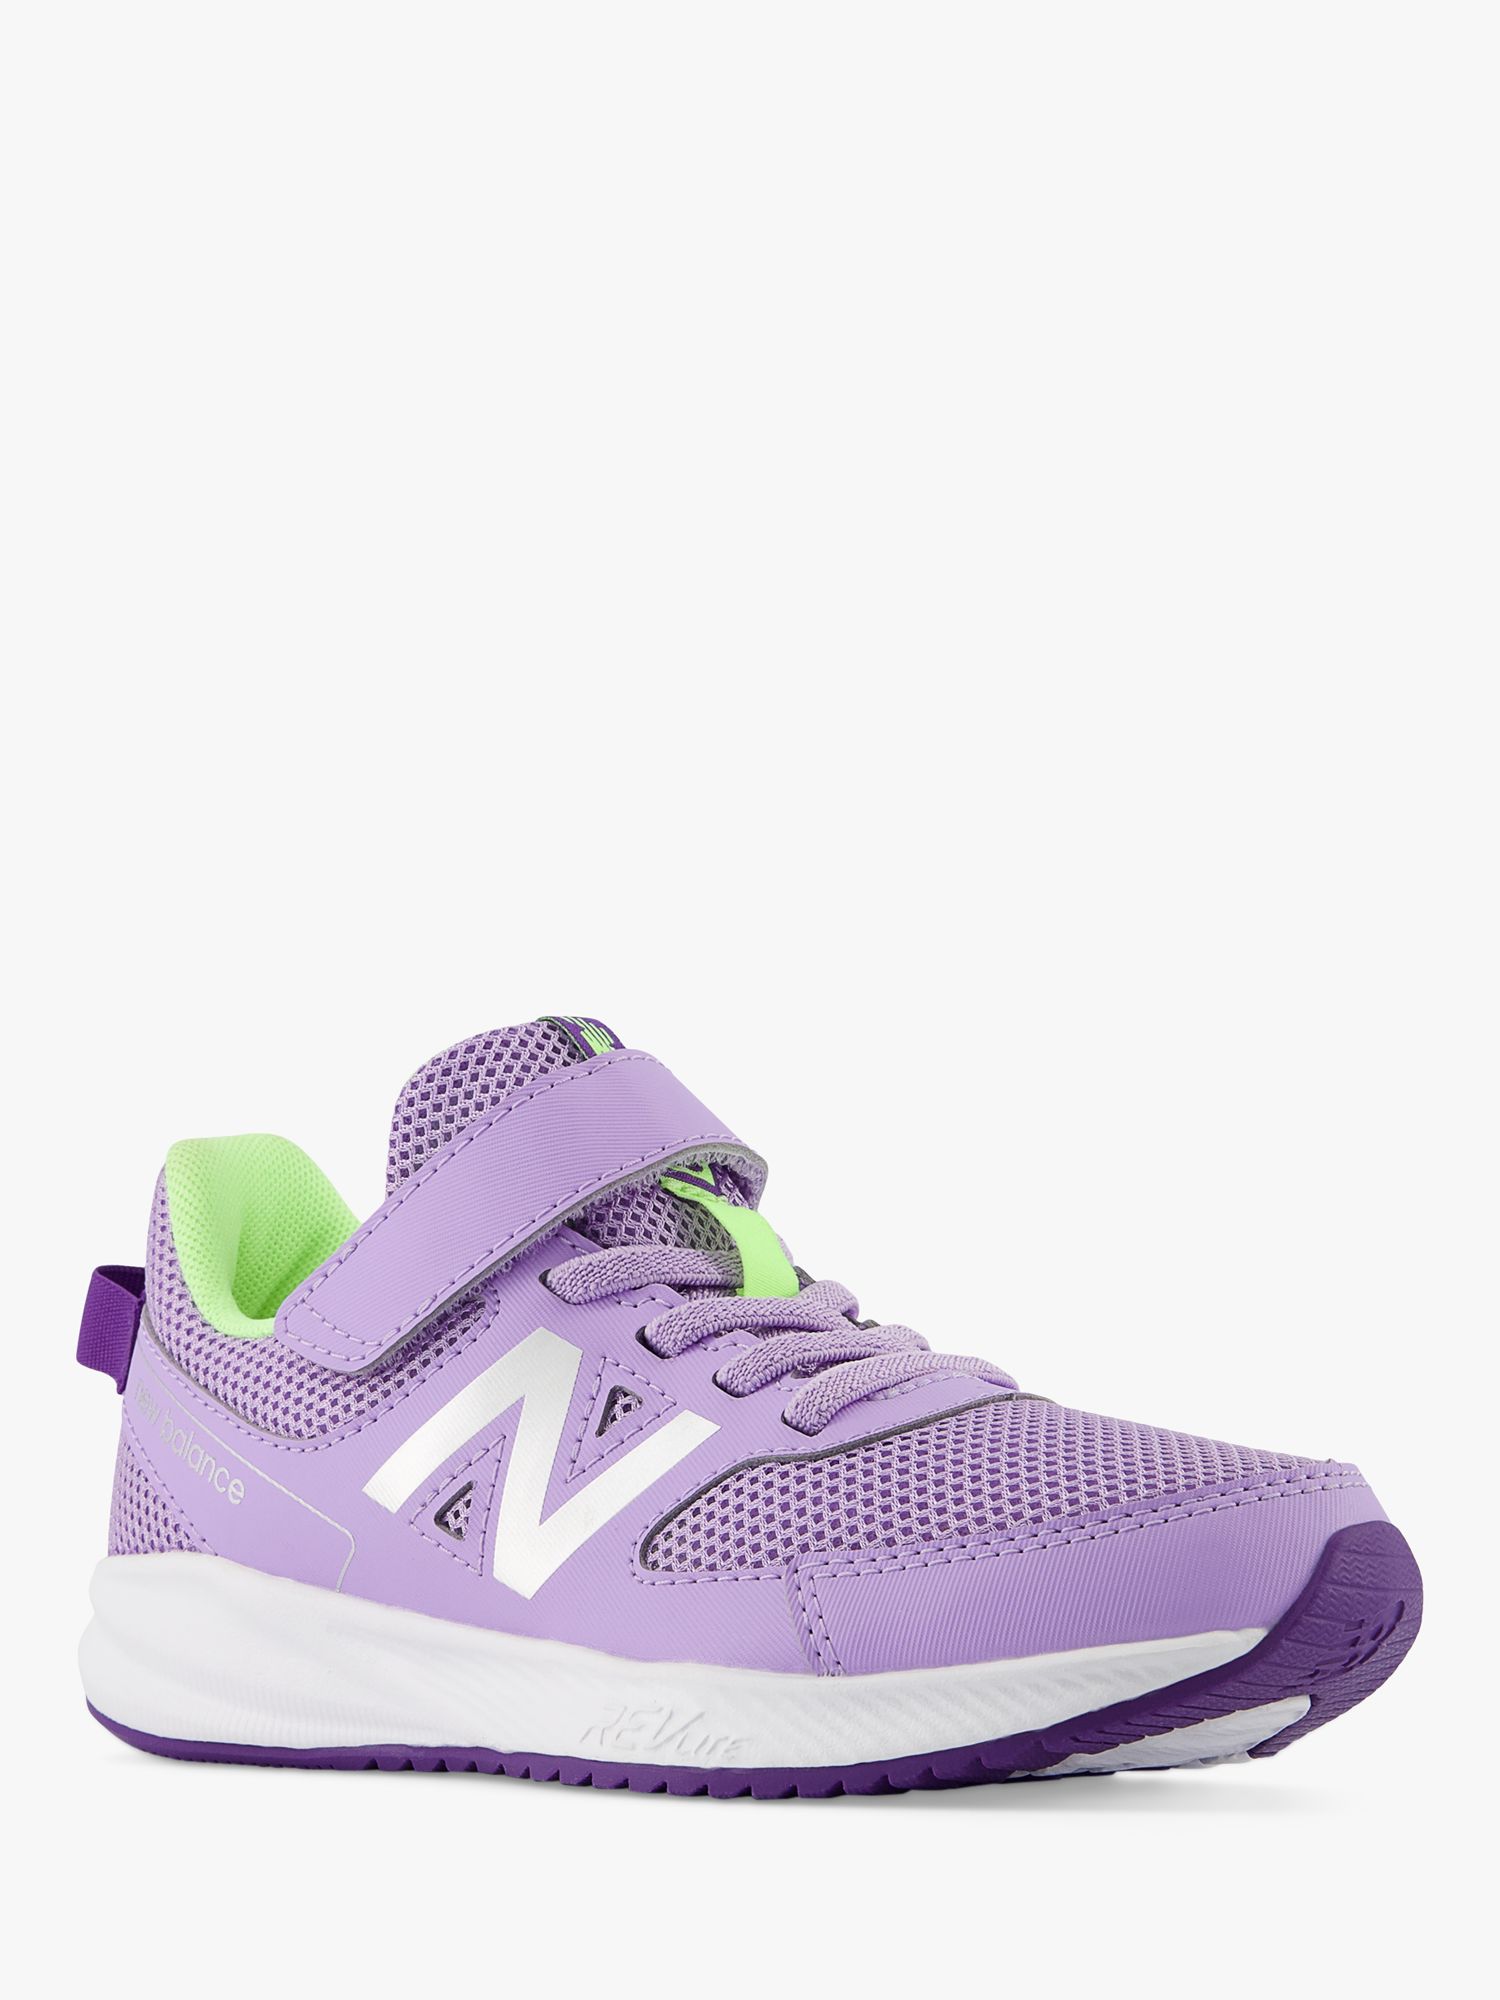 New Balance Kids' 570v3 Bungee Lace & Top Strap Trainers, Lilac, 11 Jnr